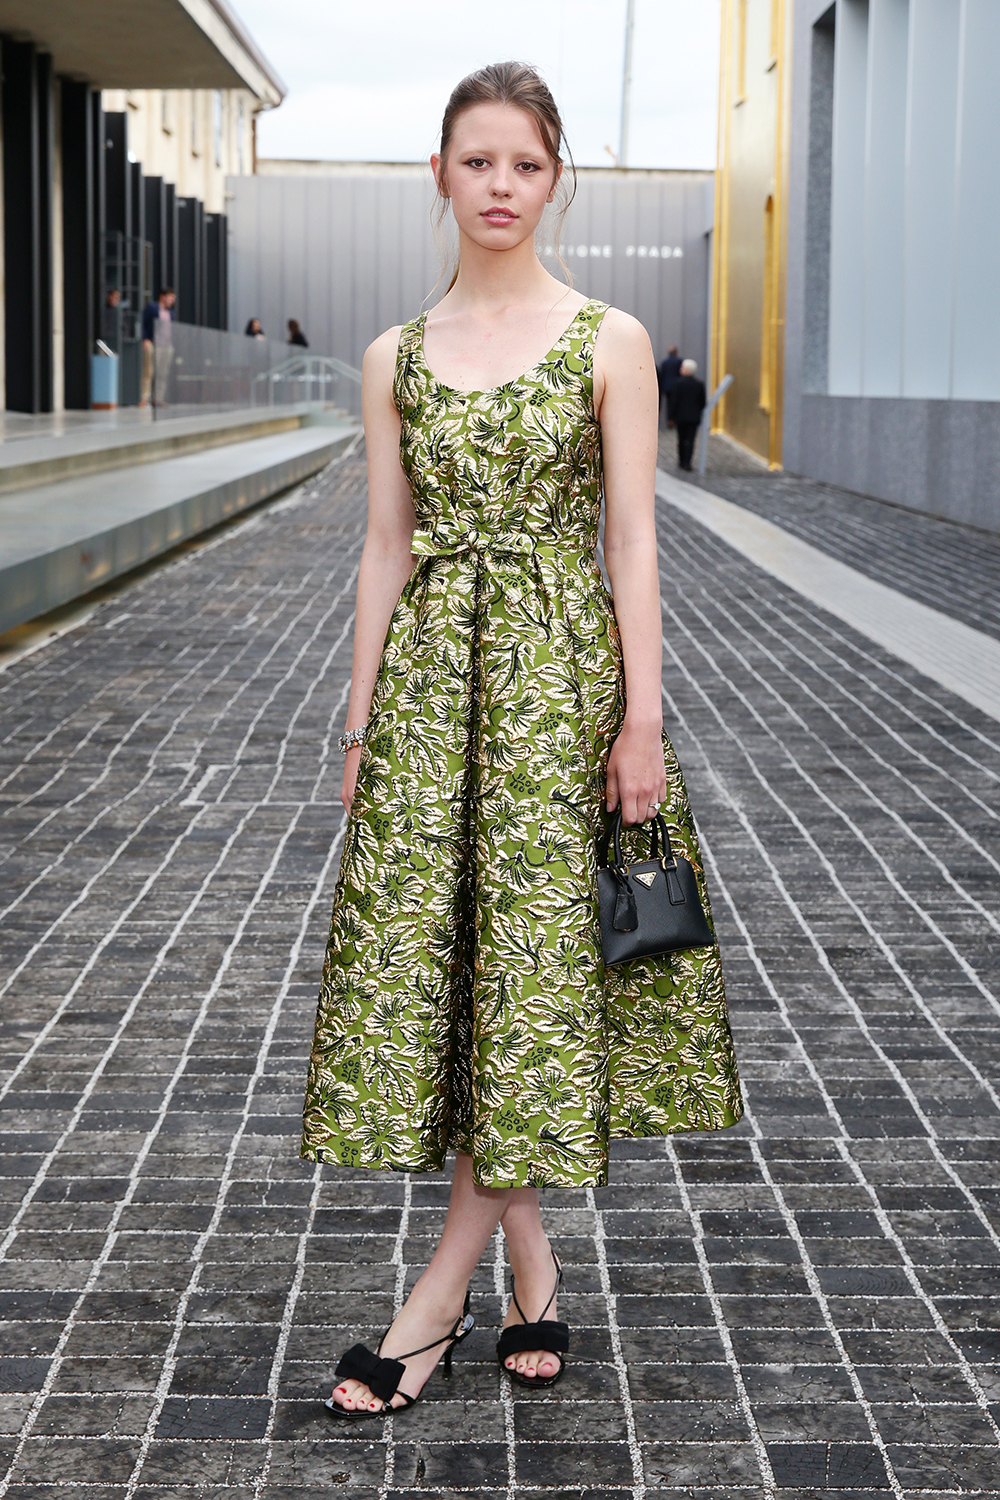 Mia Goth brings the glamour to Milan in a ladylike green dress at a private dinner hosted by Miuccia Prada and Patrizio Bertelli during Milan Men's Fashion Week.